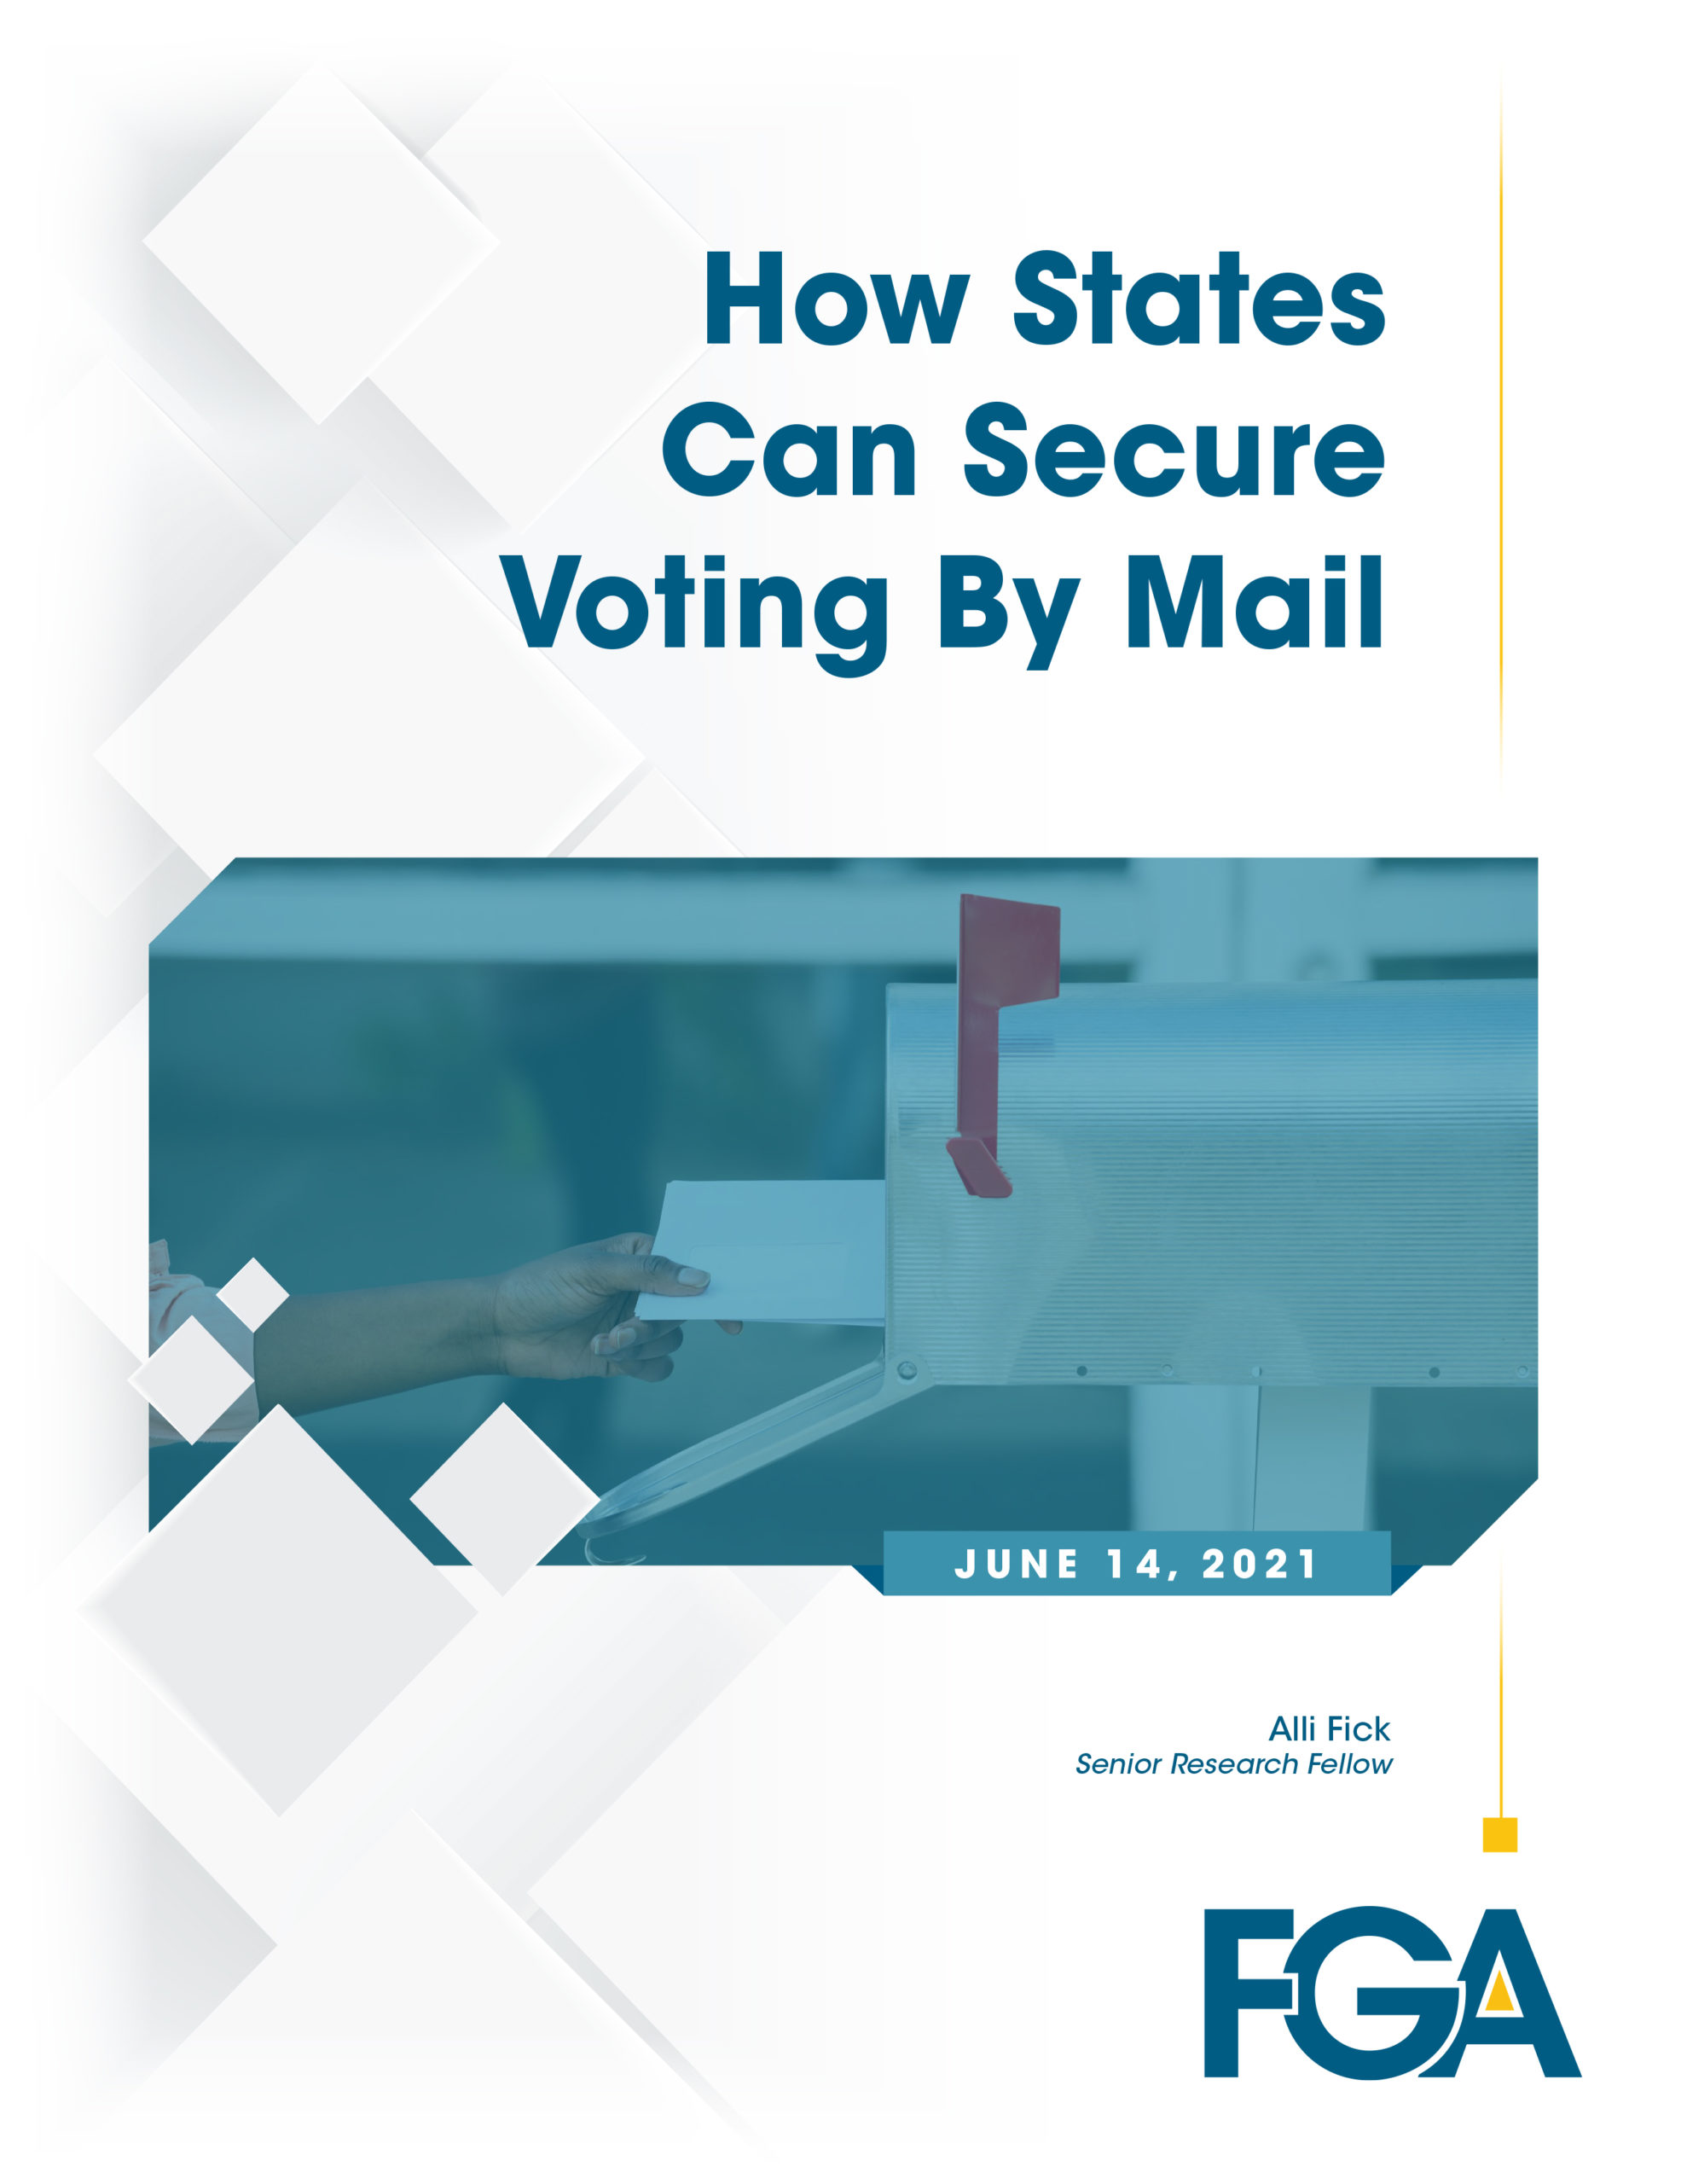 How States Can Secure Voting By Mail